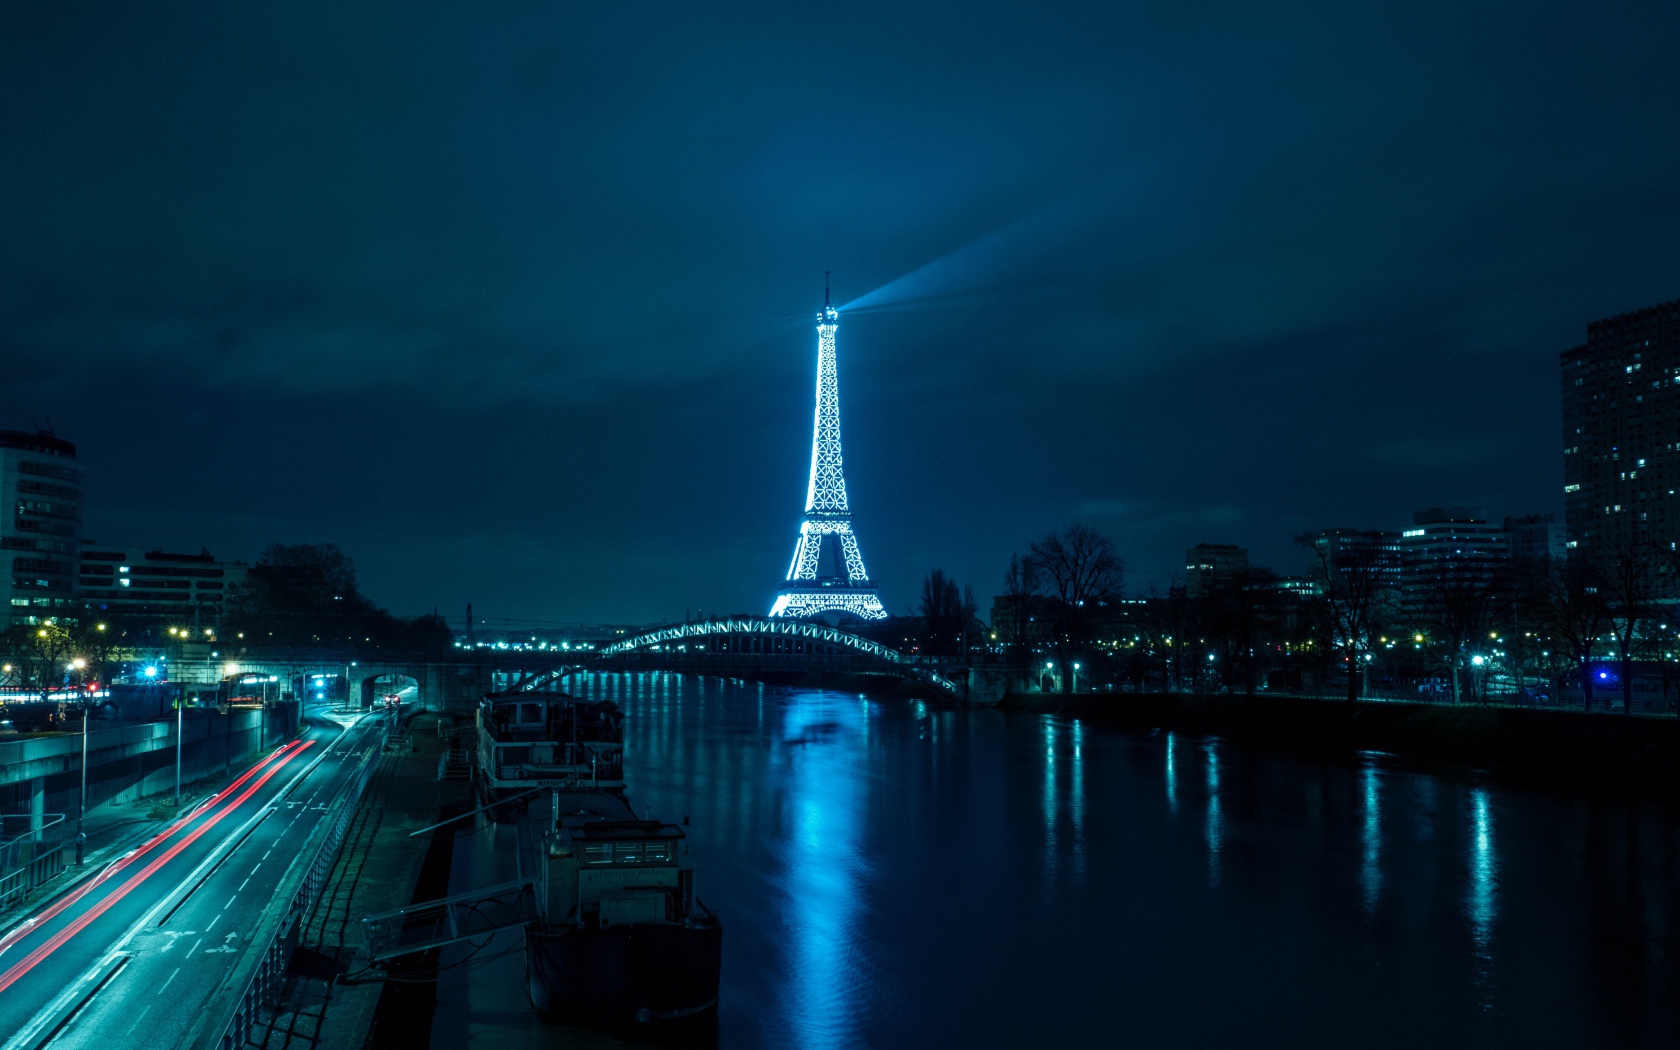 Eiffel Tower at night on the canal background, France